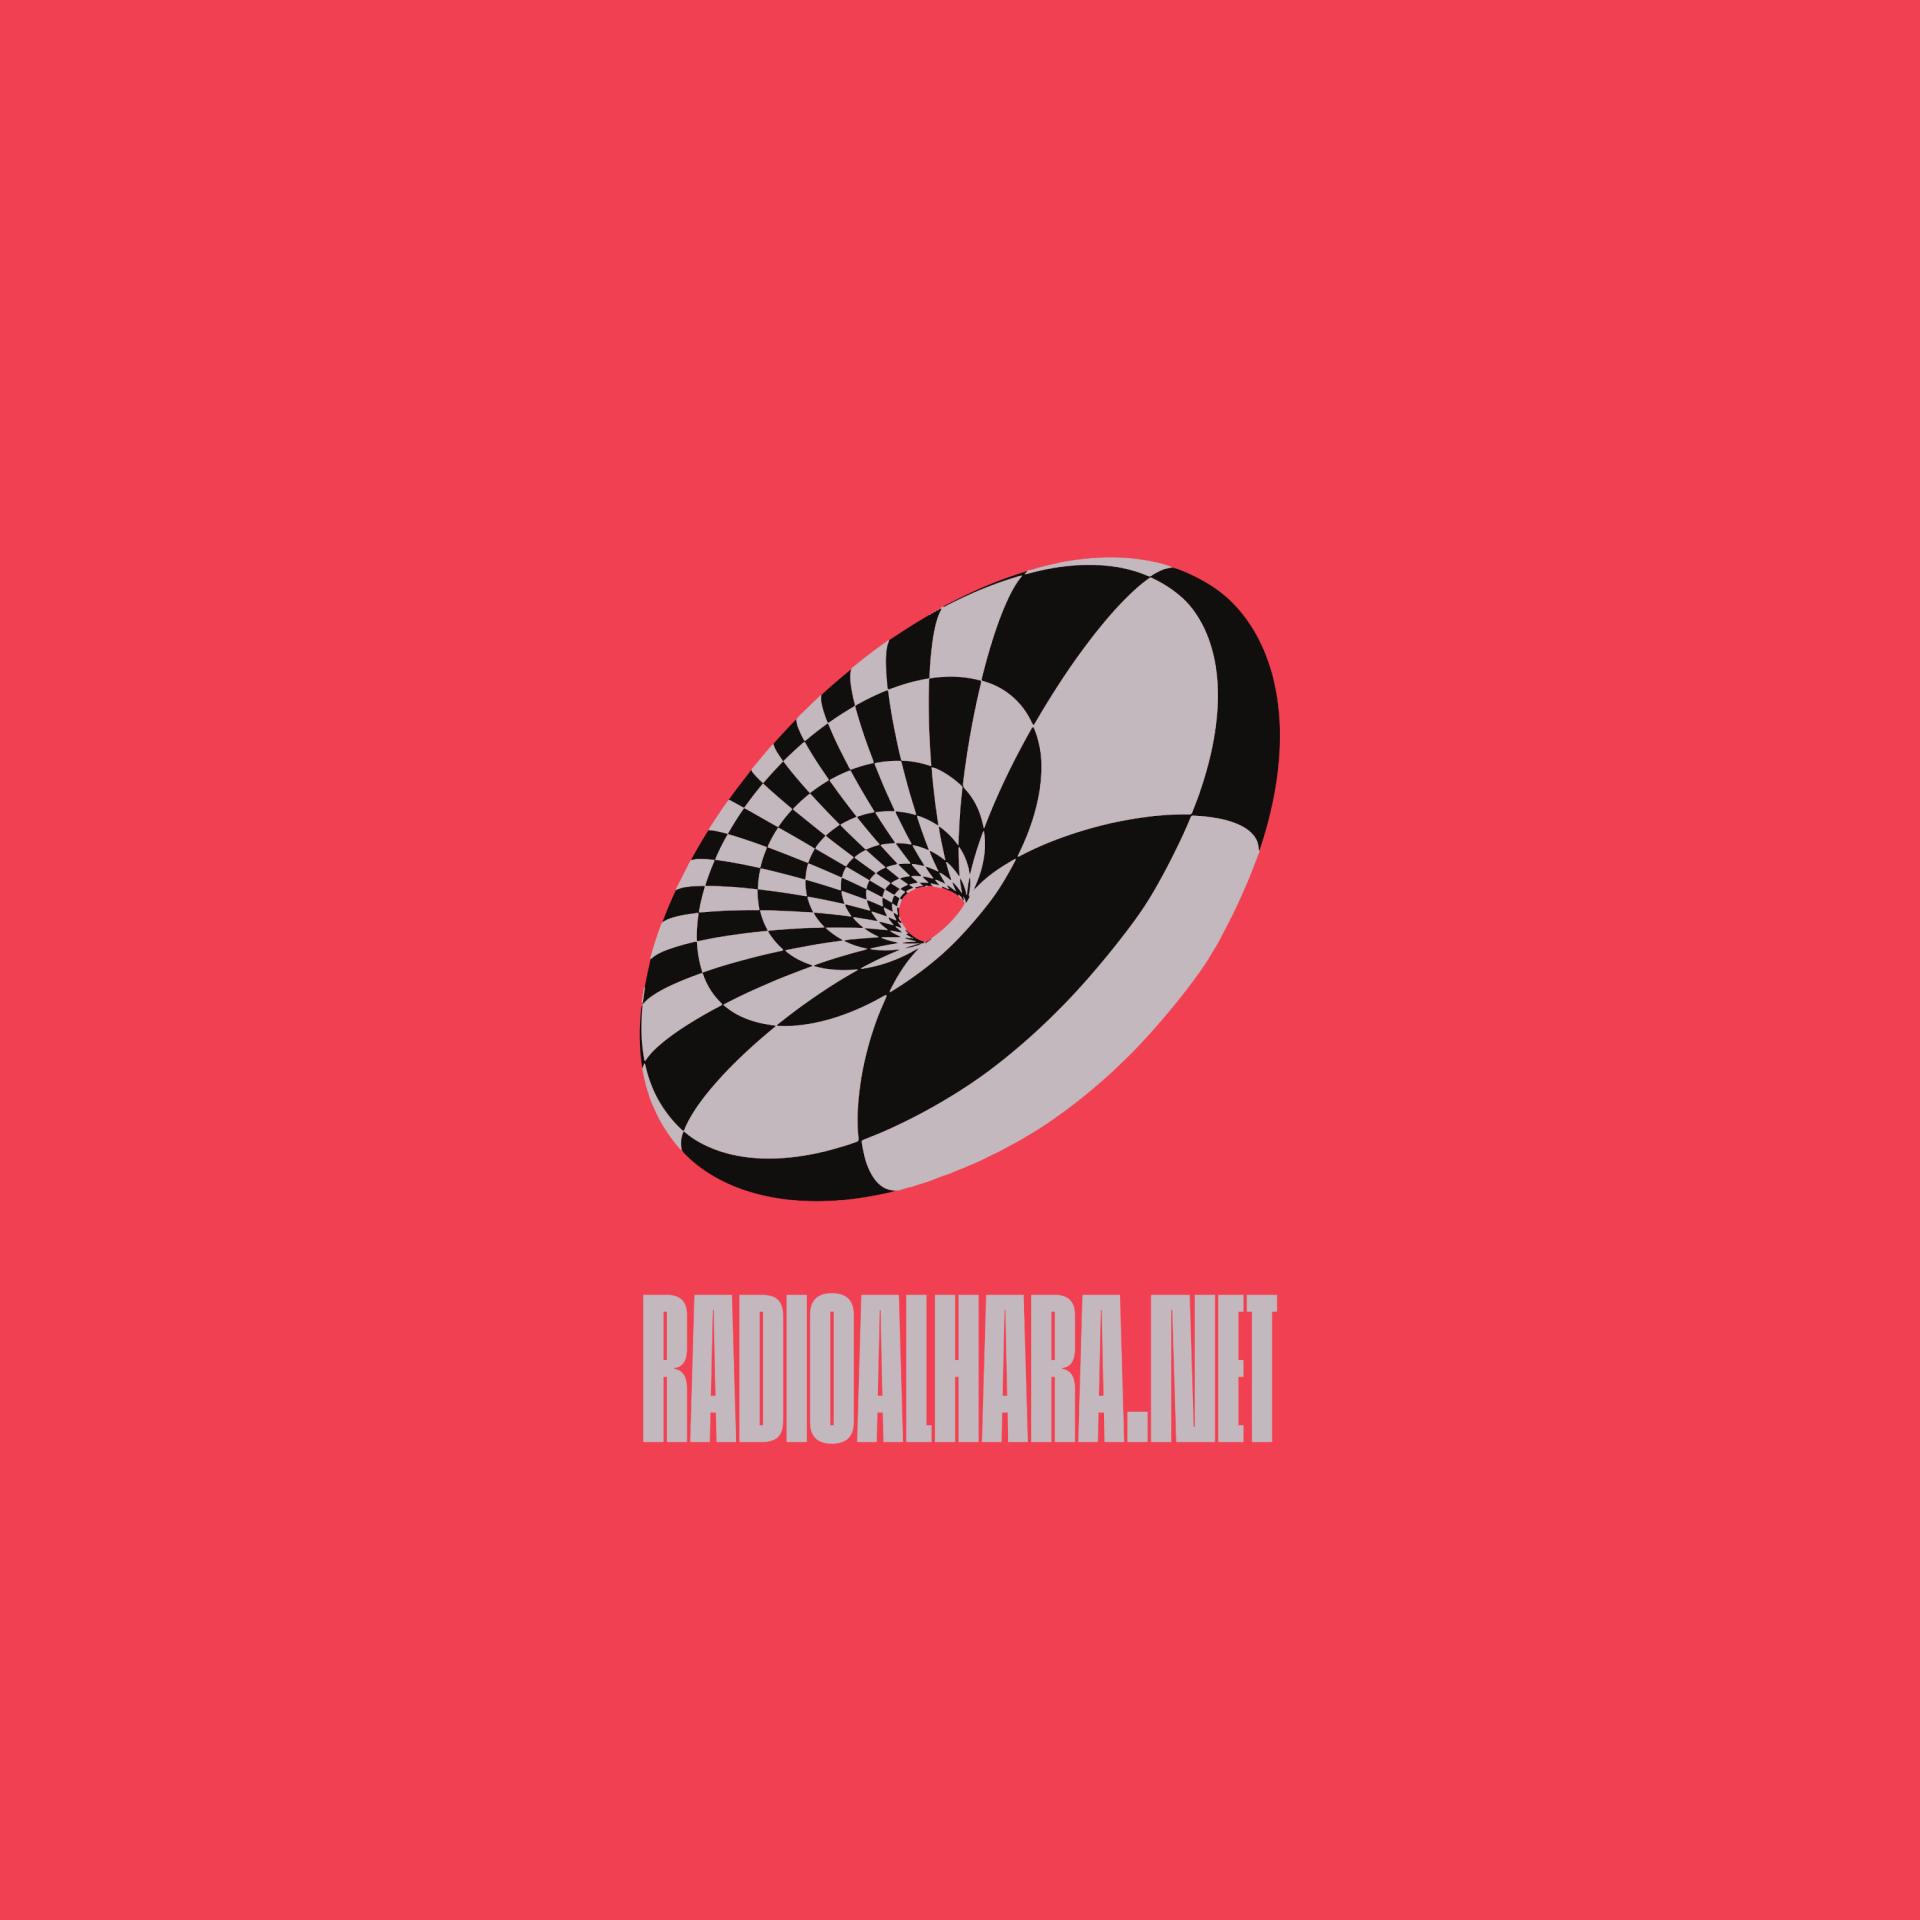 A checkered, donut-shaped geometric form in front a red background, underneath the radio URL